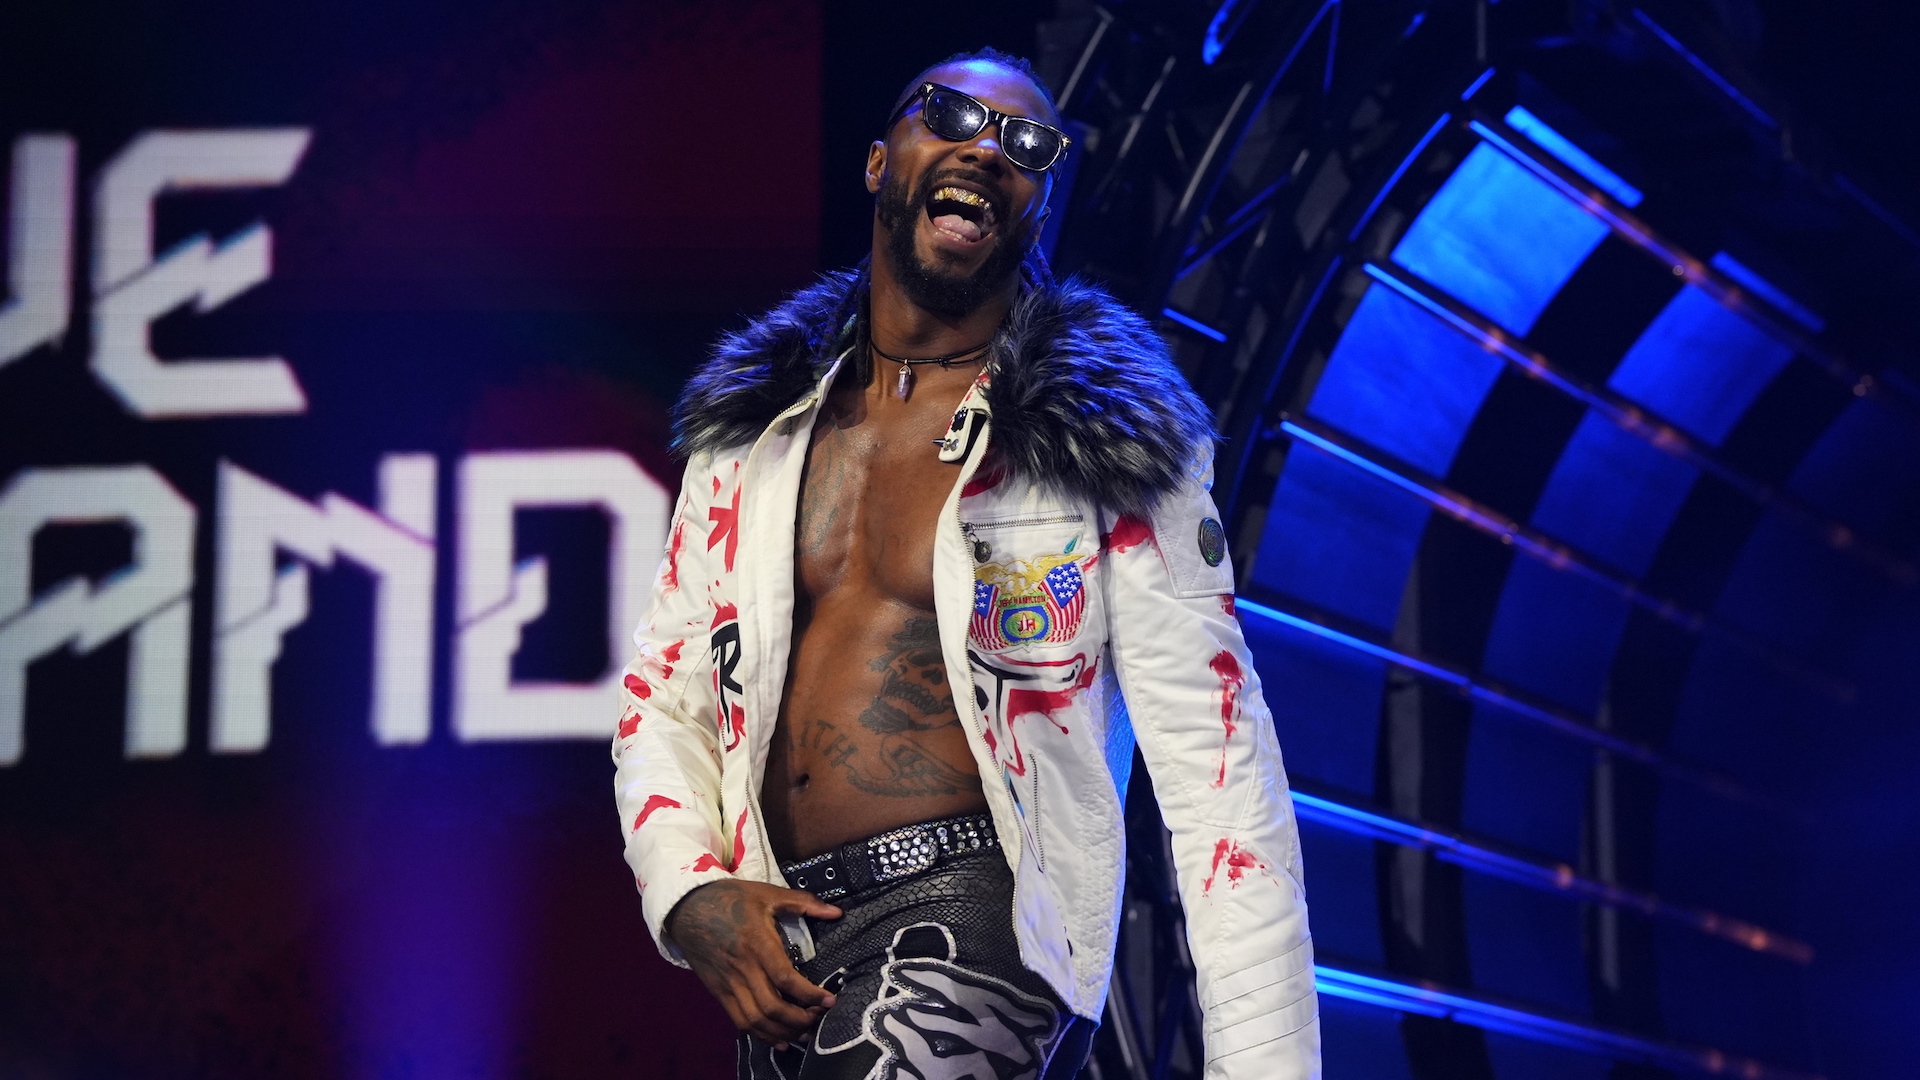 AEW: Sweve Strickland on WWE Career Issues & Current AEW Career ...